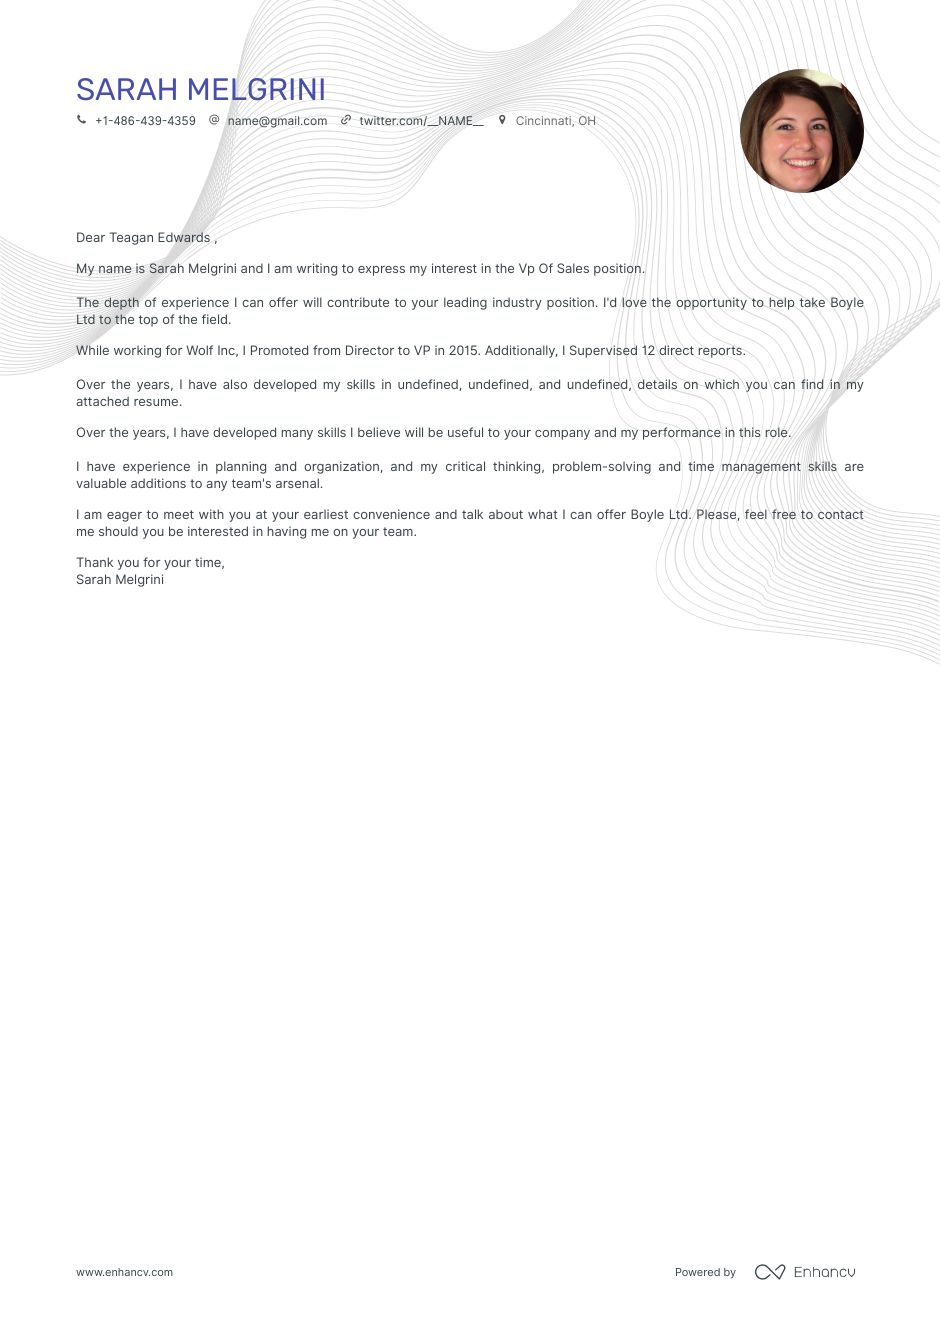 vp-of-sales-resume-coverletter.png